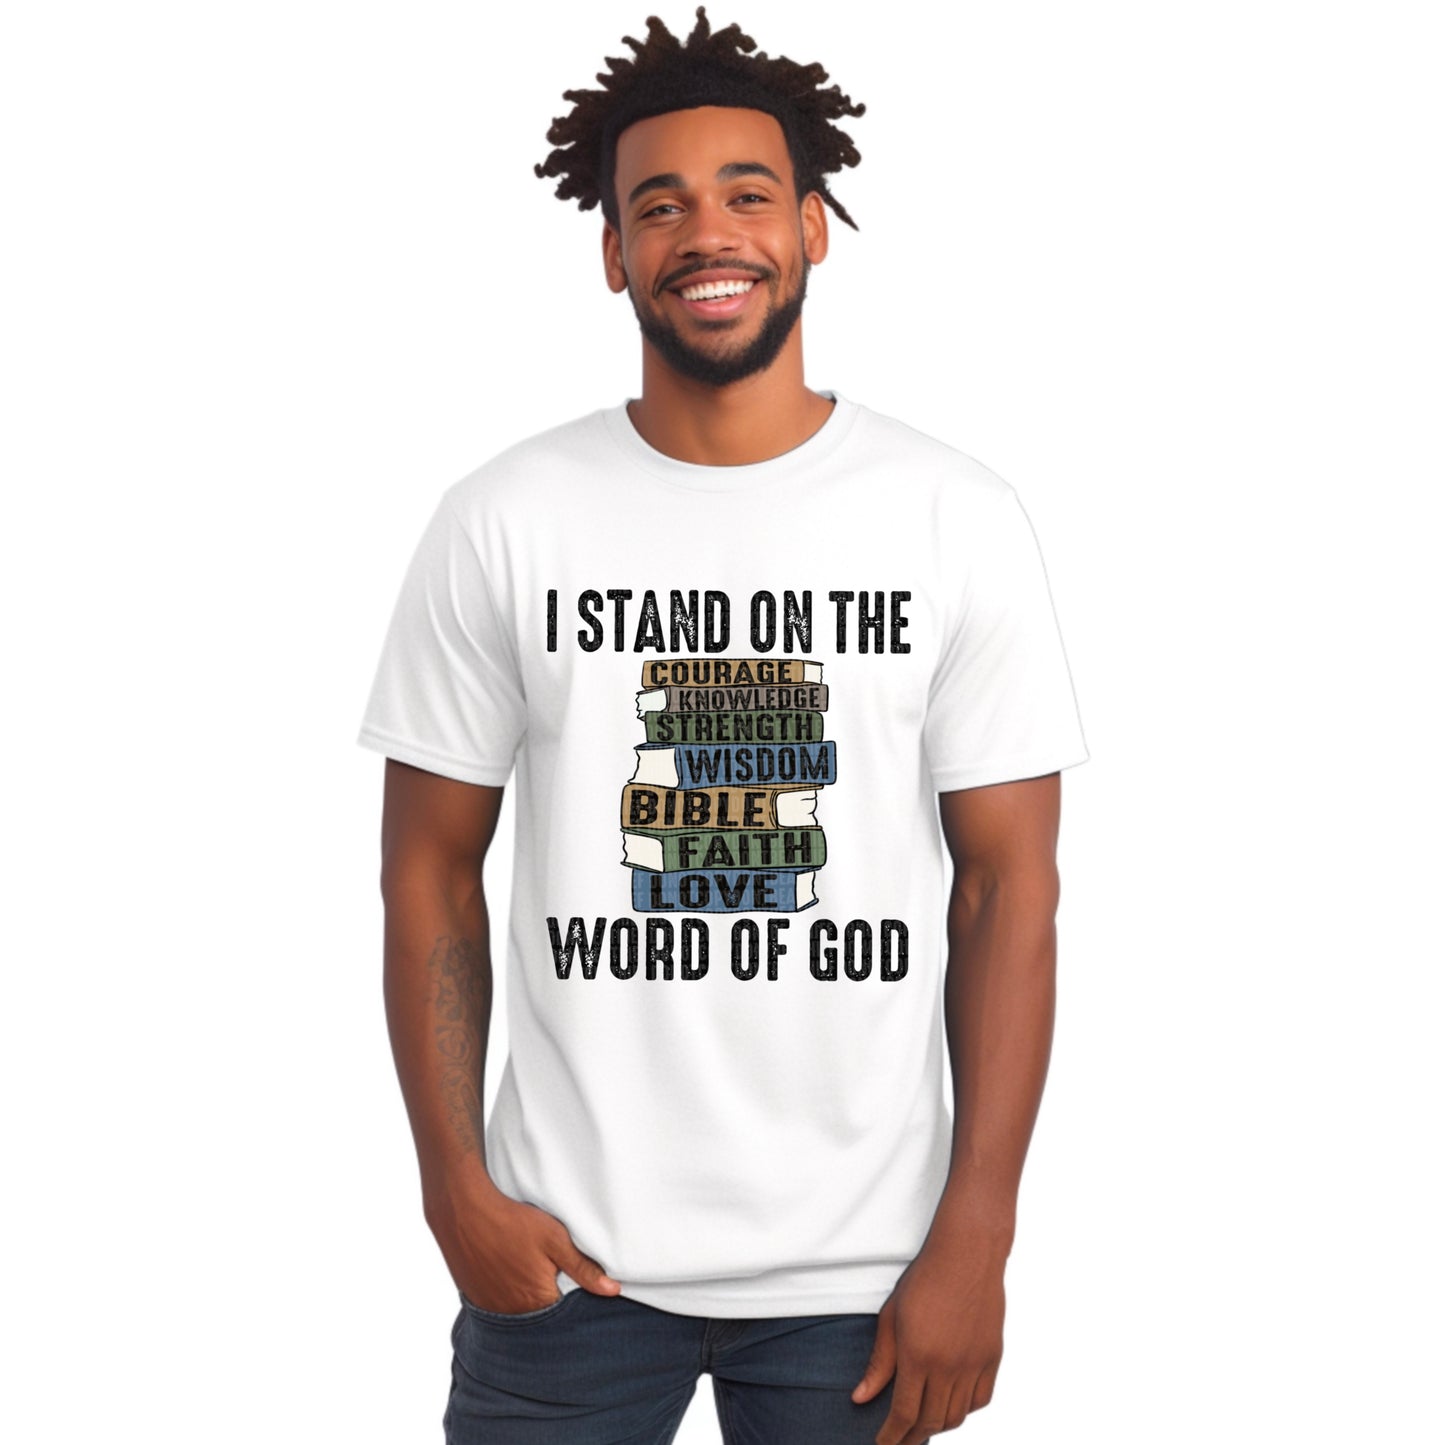 I stand on the word of God